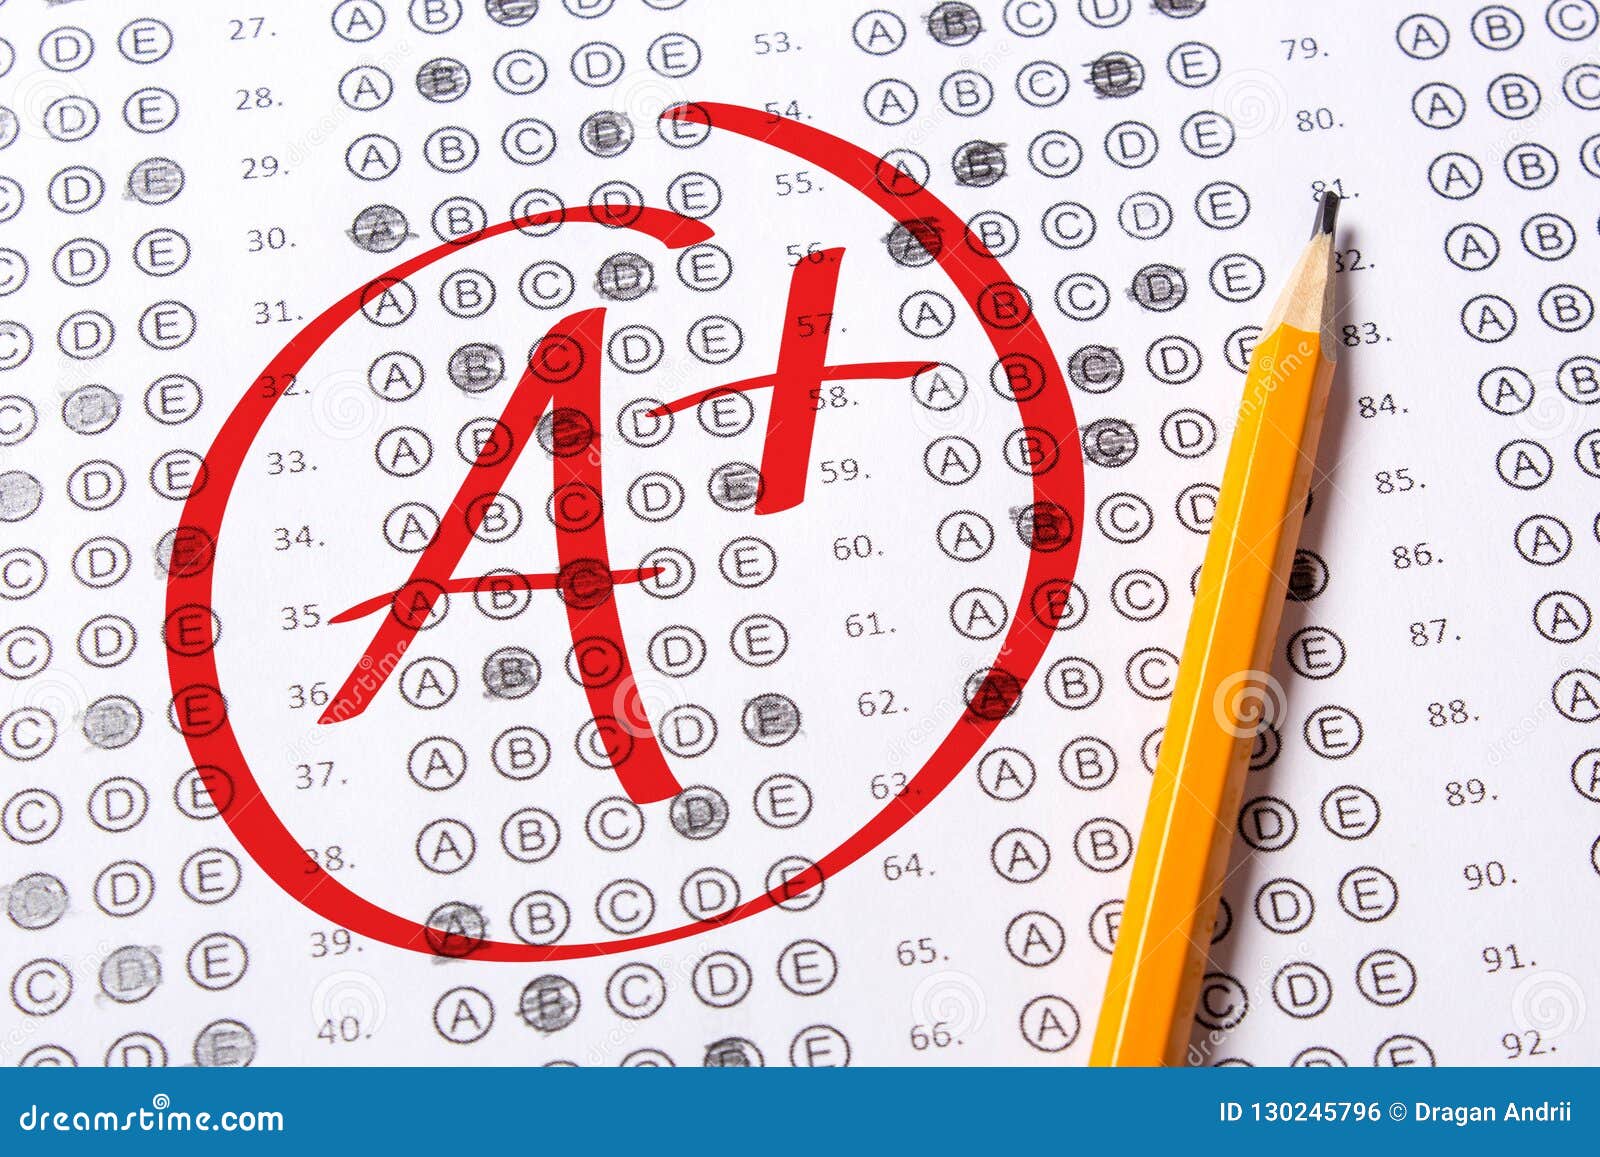 Good Grade Of A Plus Is Written With Red Pen On The Tests Stock Photo